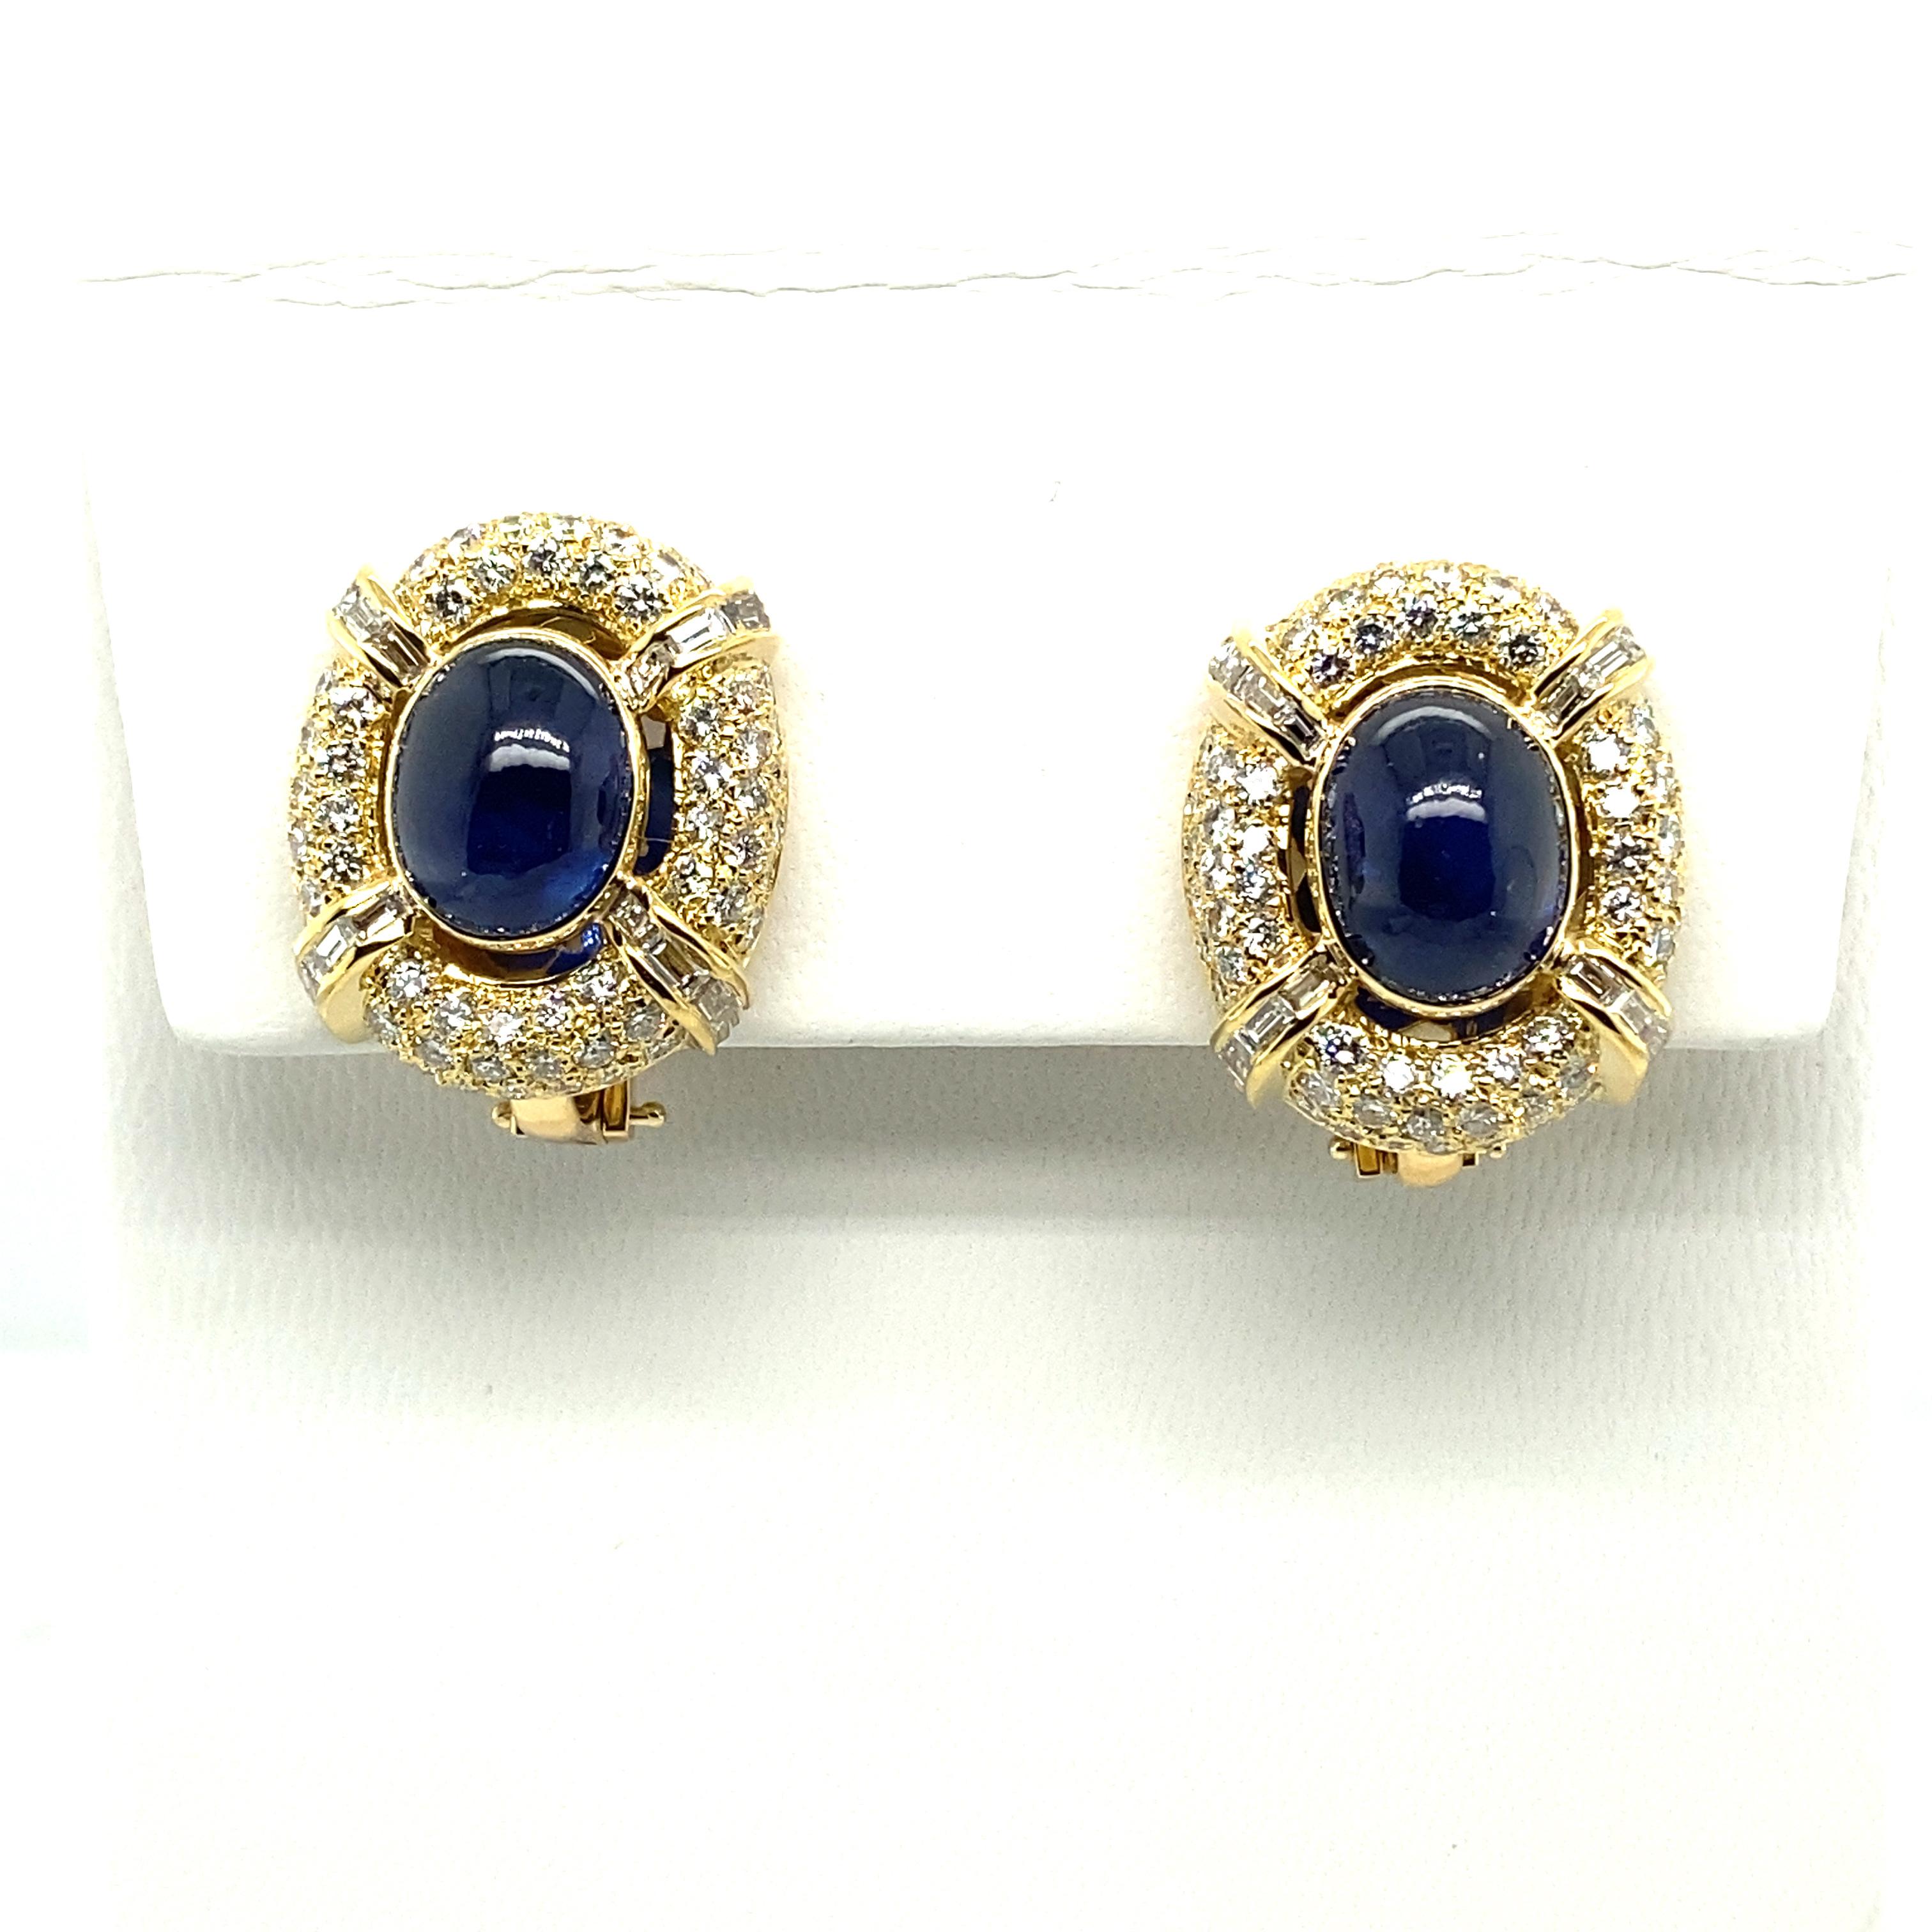 Sapphire and Diamond Earclips in 18 Karat Yellow Gold by MAYOR'S For Sale 5